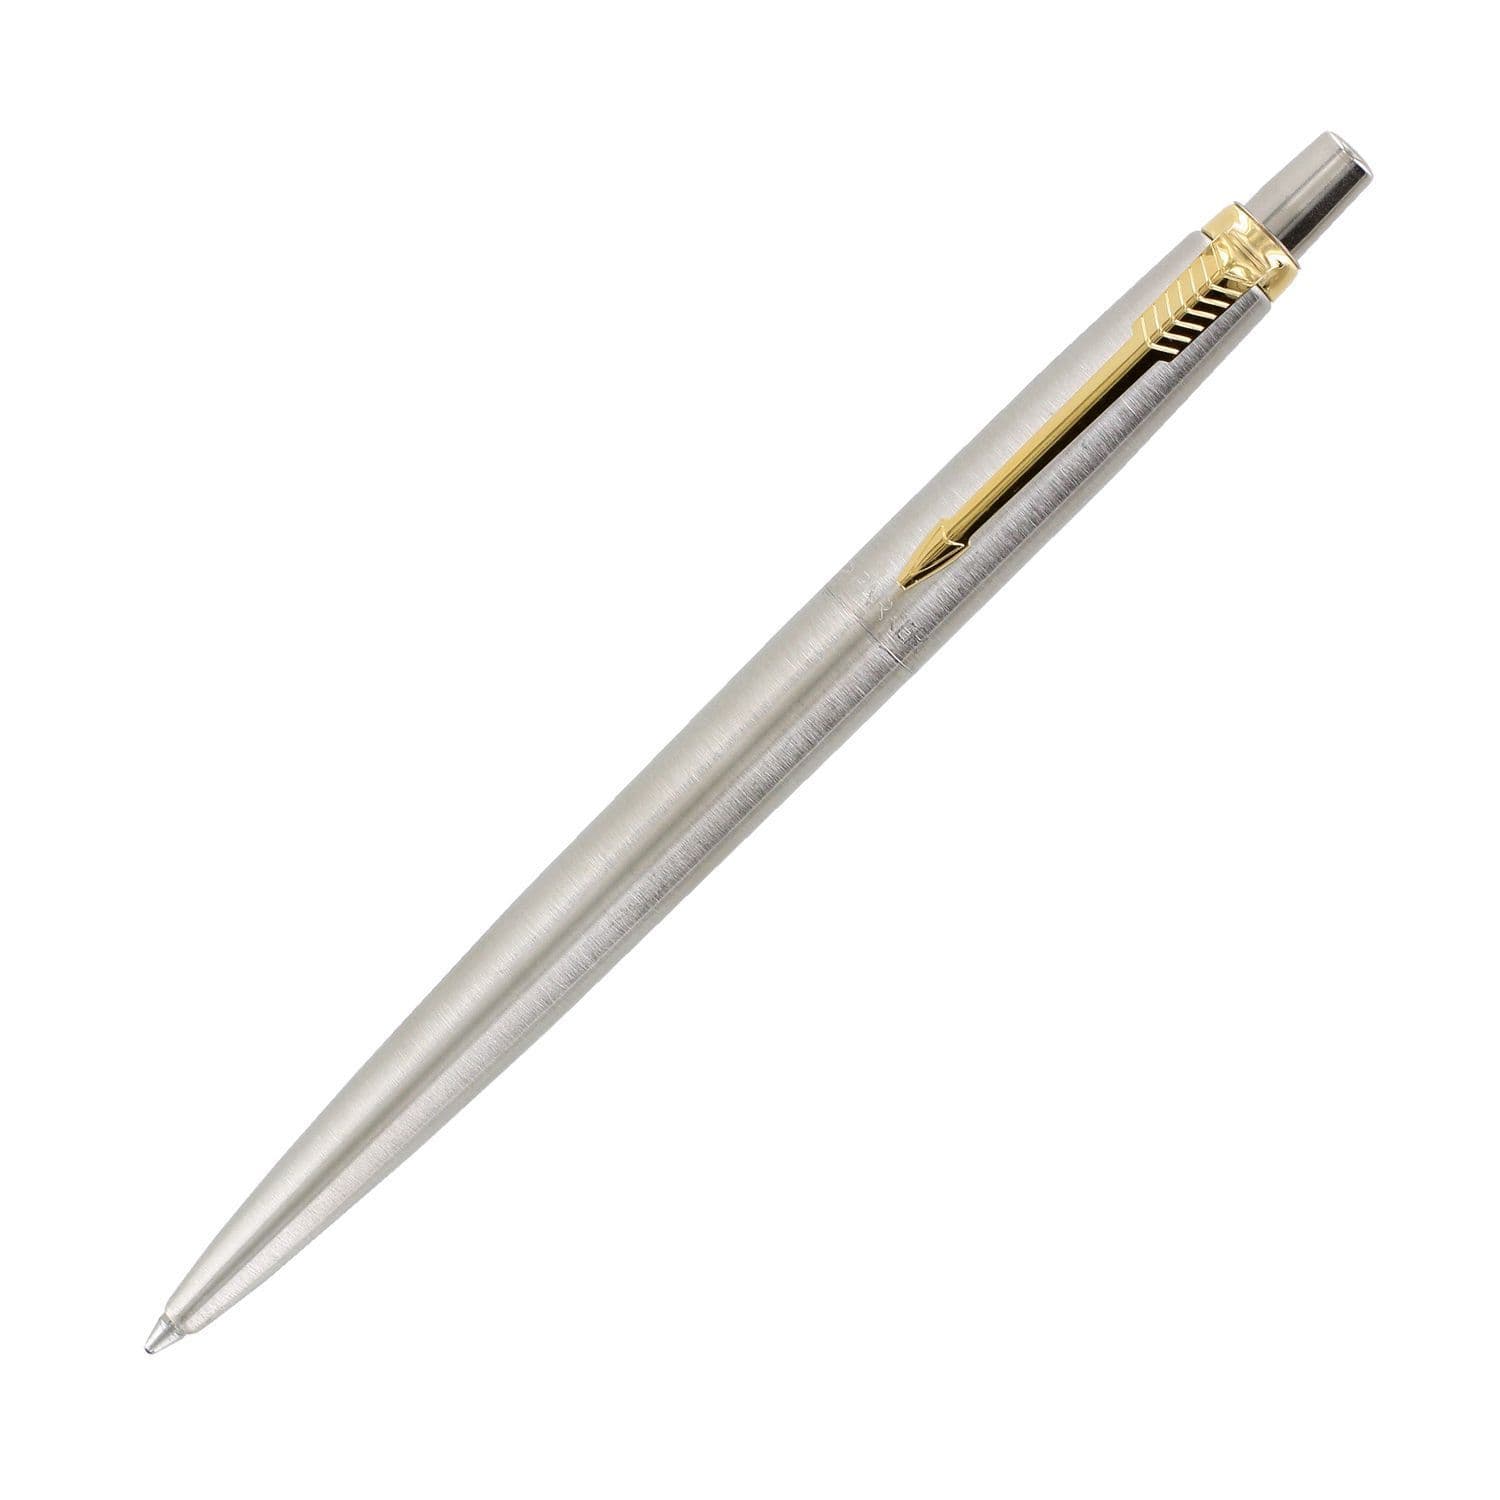 GENUINE PARKER CLASSIC GOLD BALL POINT PEN - GIFT BOX